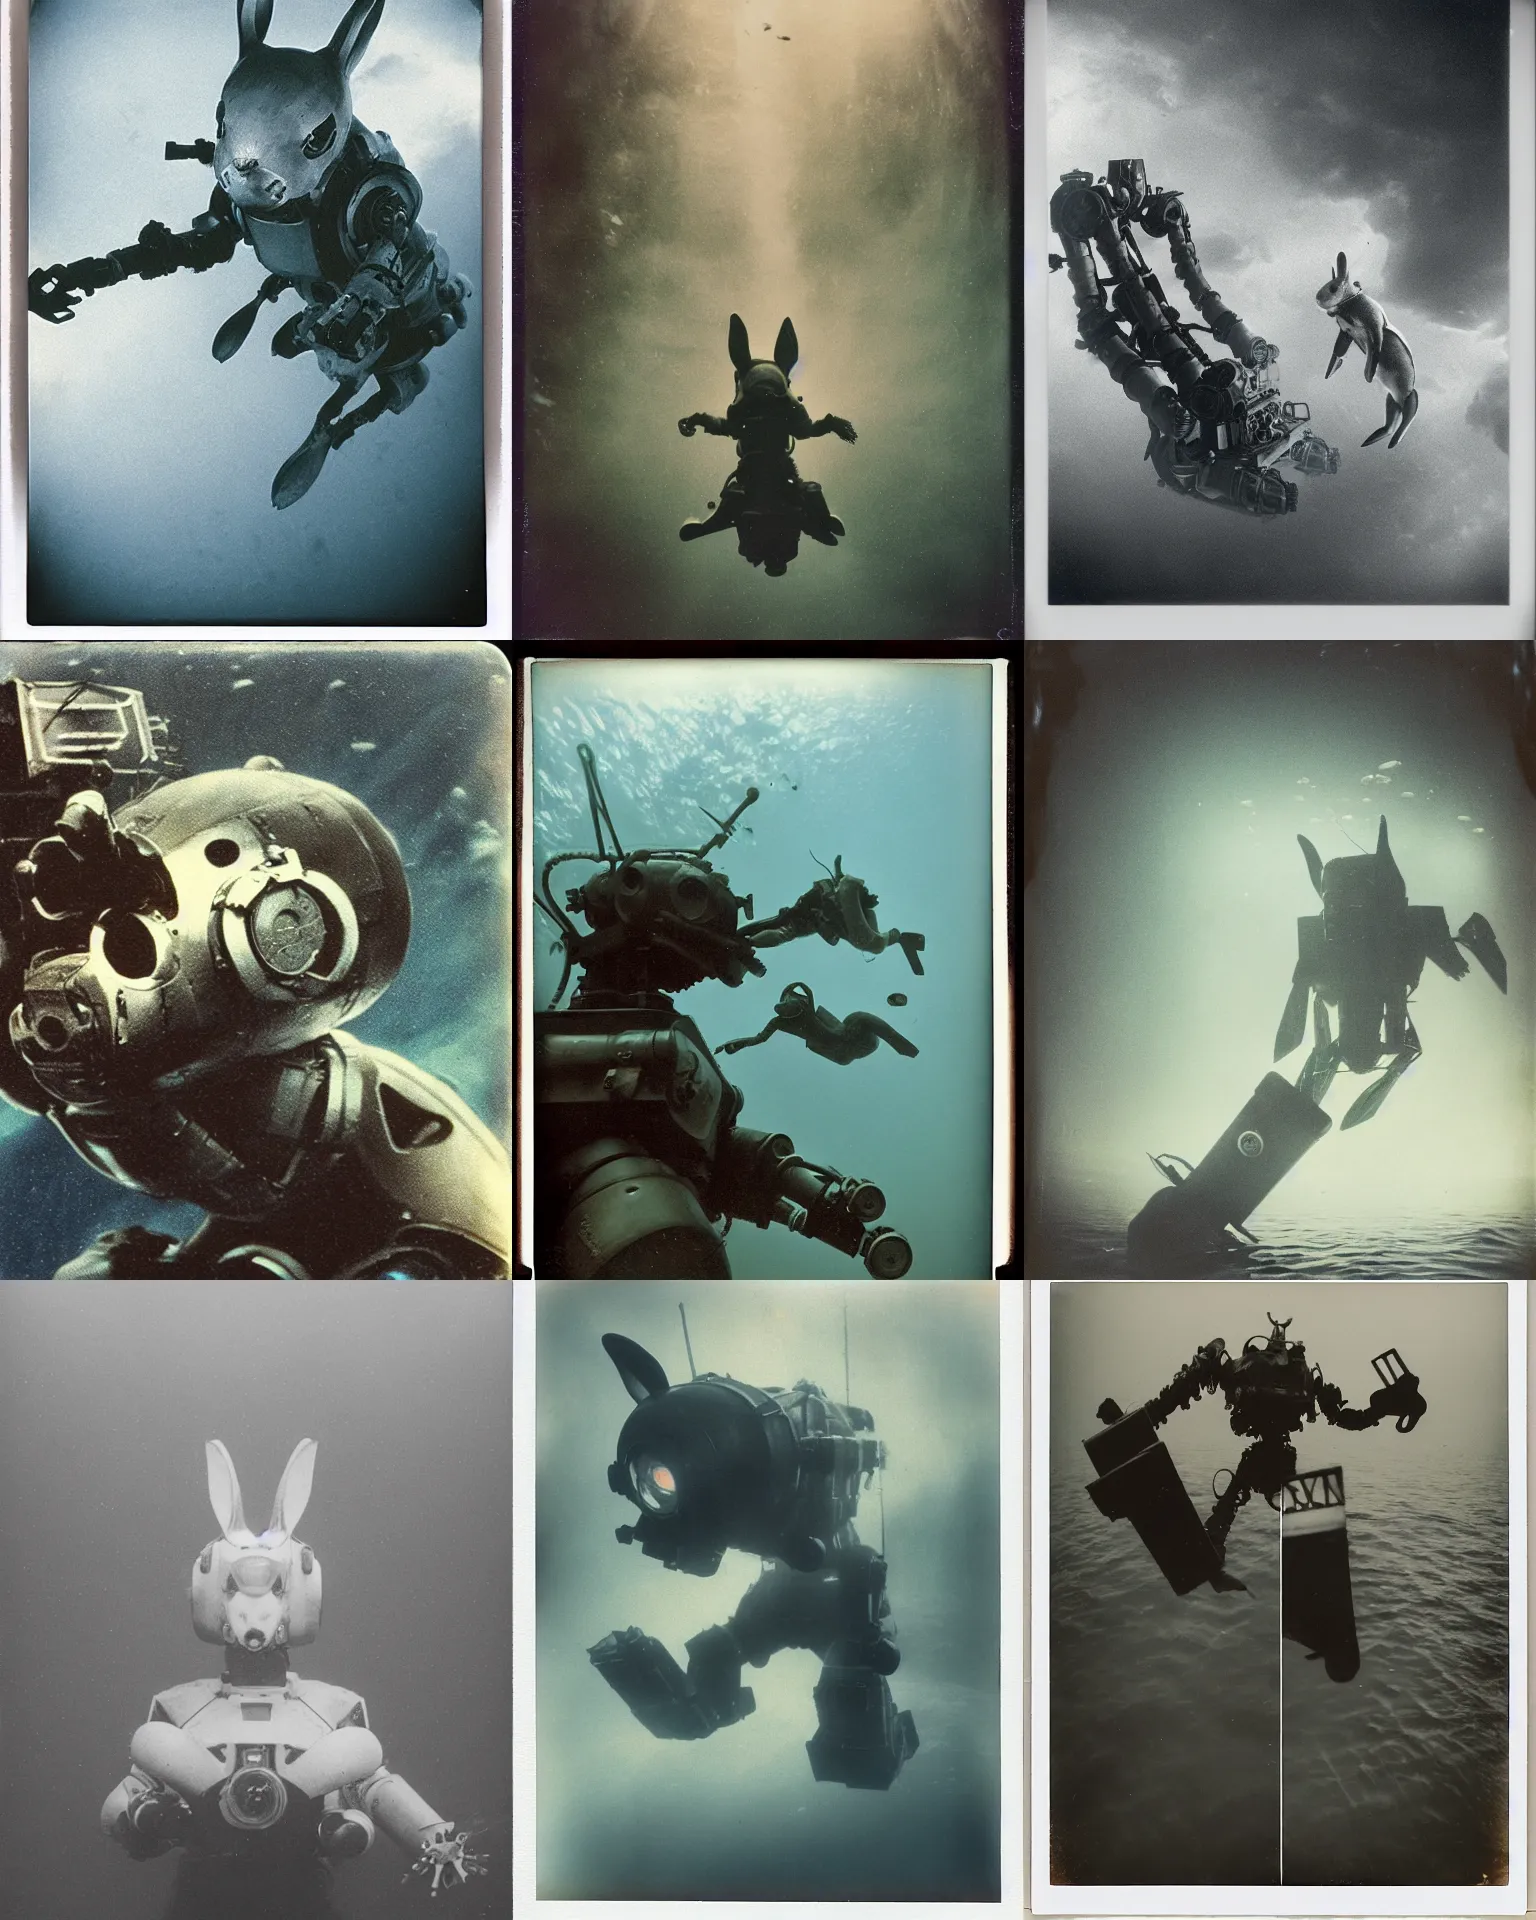 Prompt: deep underwater giant oversized battle rabbit robot mech with oversized ears as giant underwater mech rabbit on titanic wreck underwater. smal tiny human diver, on side Cinematic focus, sharp Polaroid photo, vintage, neutral colors, soft lights, by Serov Valentin, by lisa yuskavage, by Andrei Tarkovsky